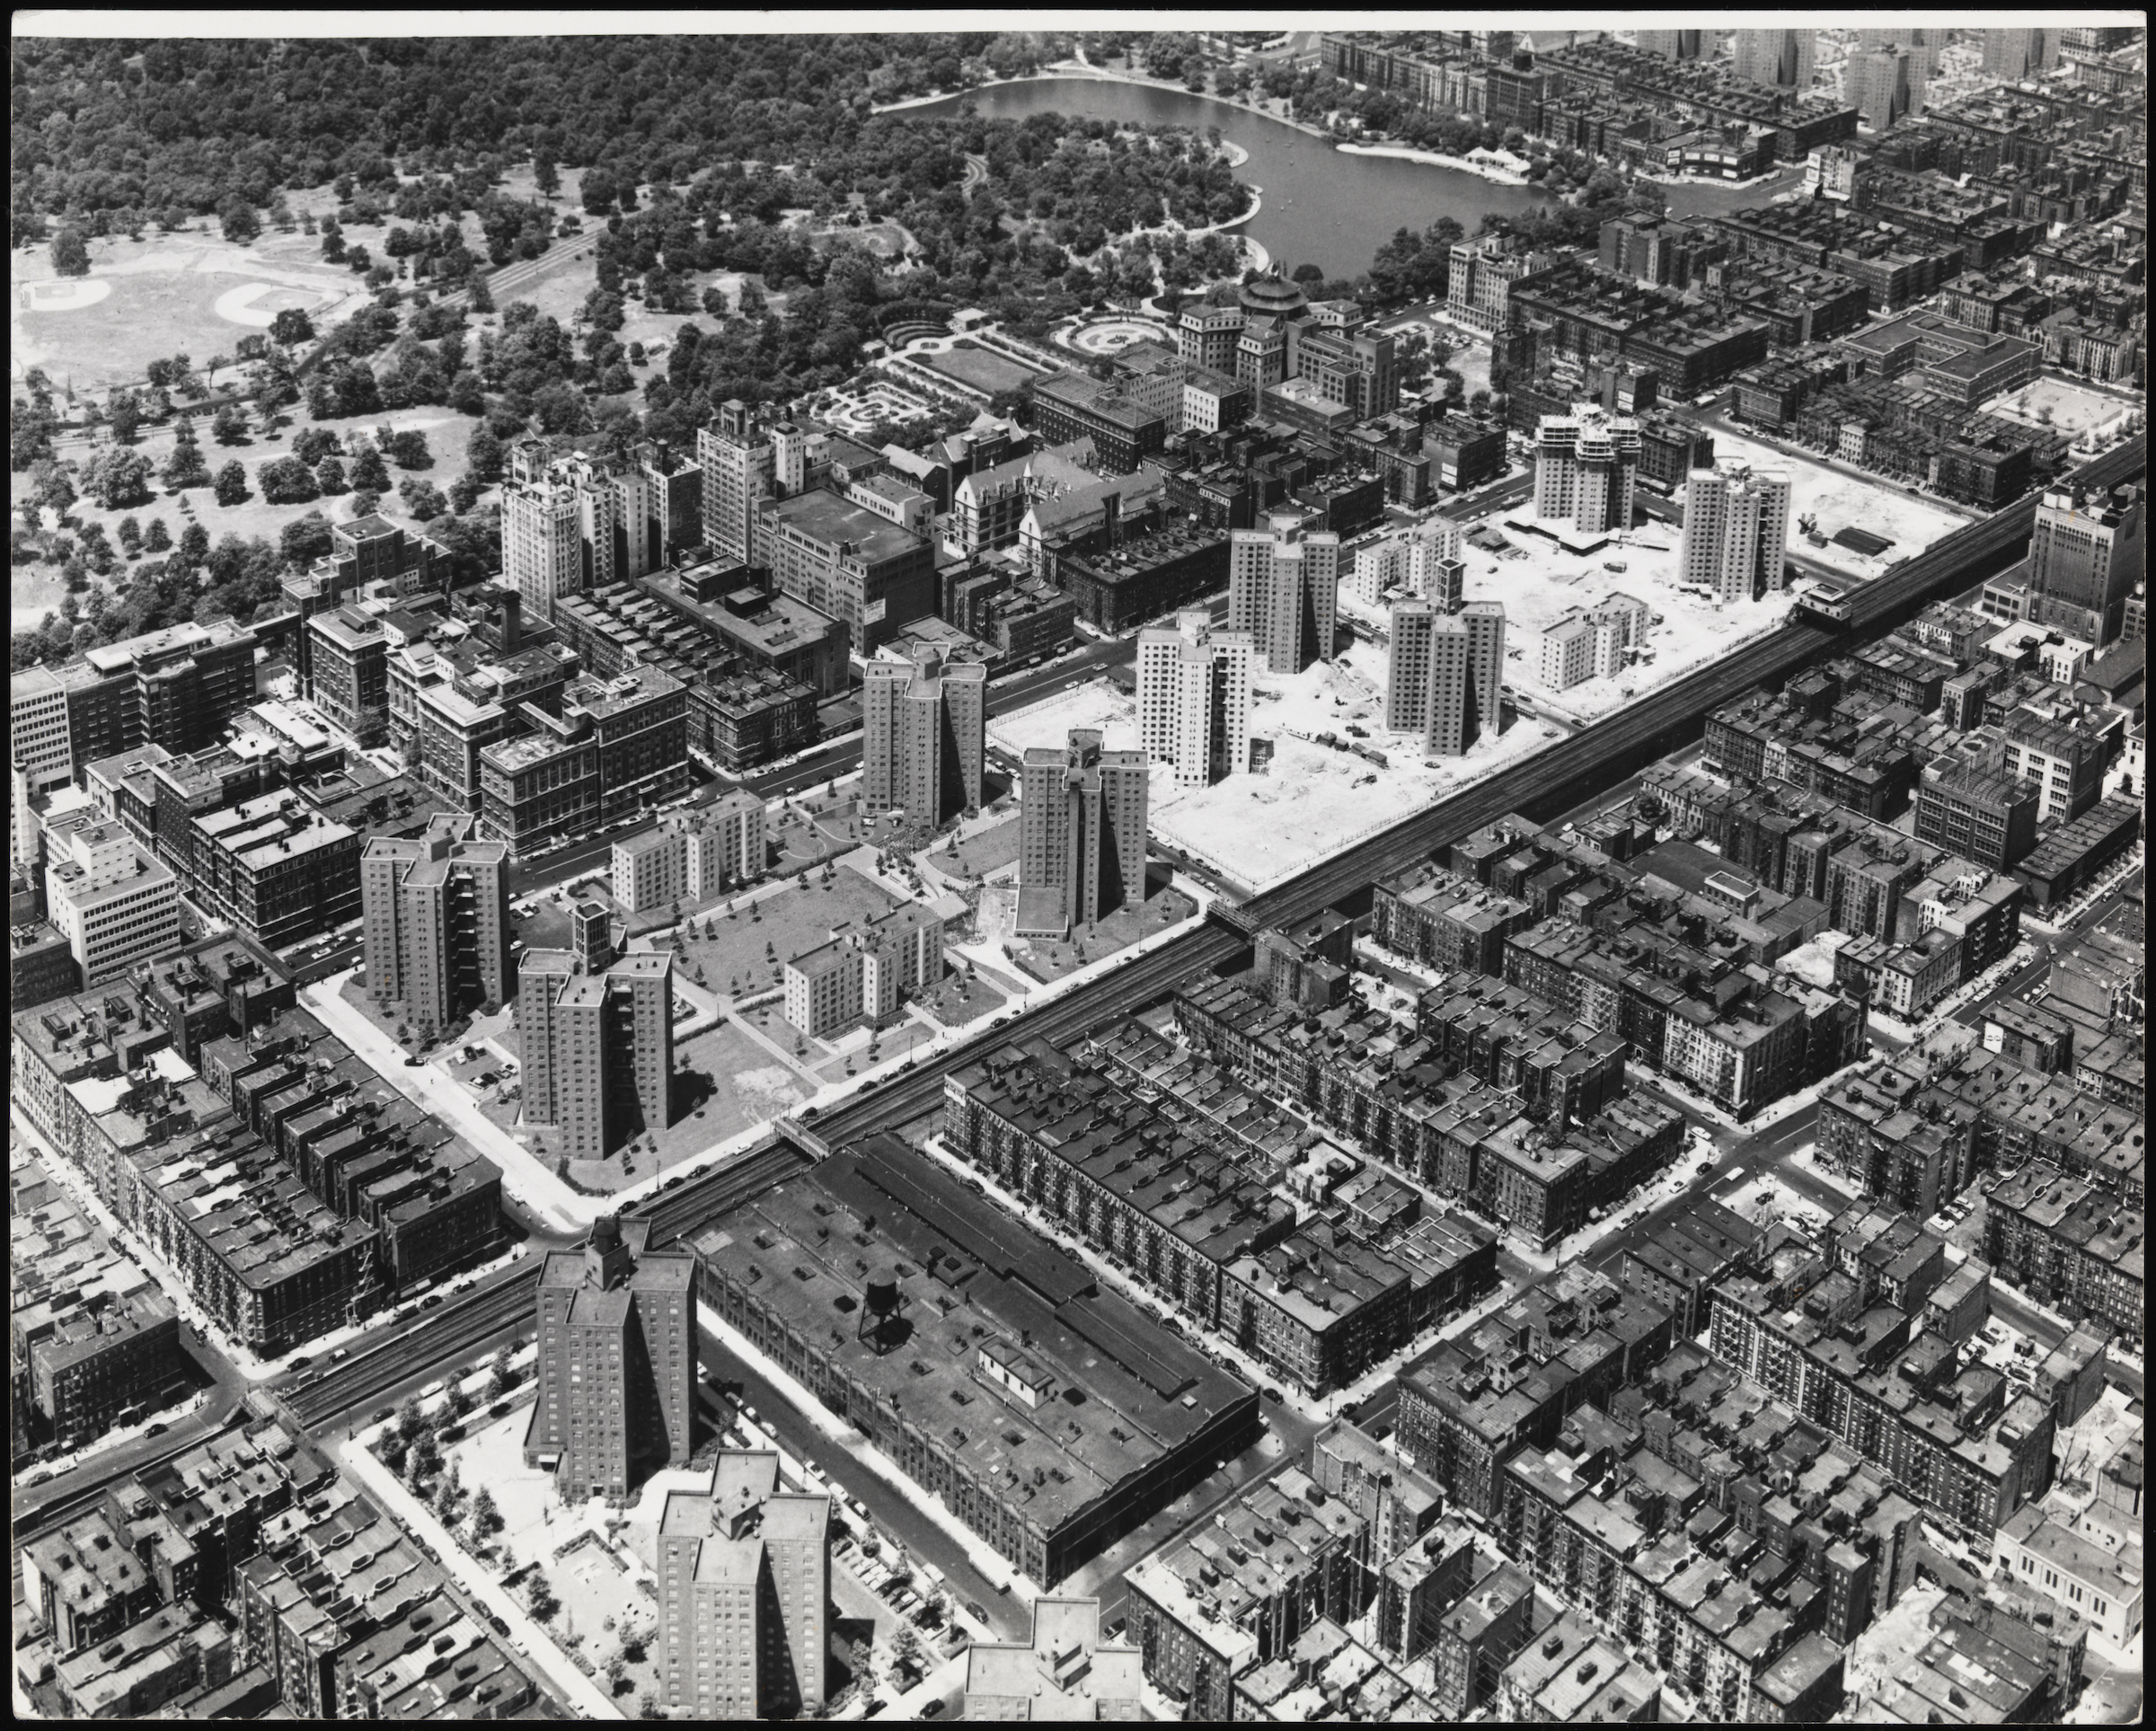 Black and white photograph taken from aerial view of New York City